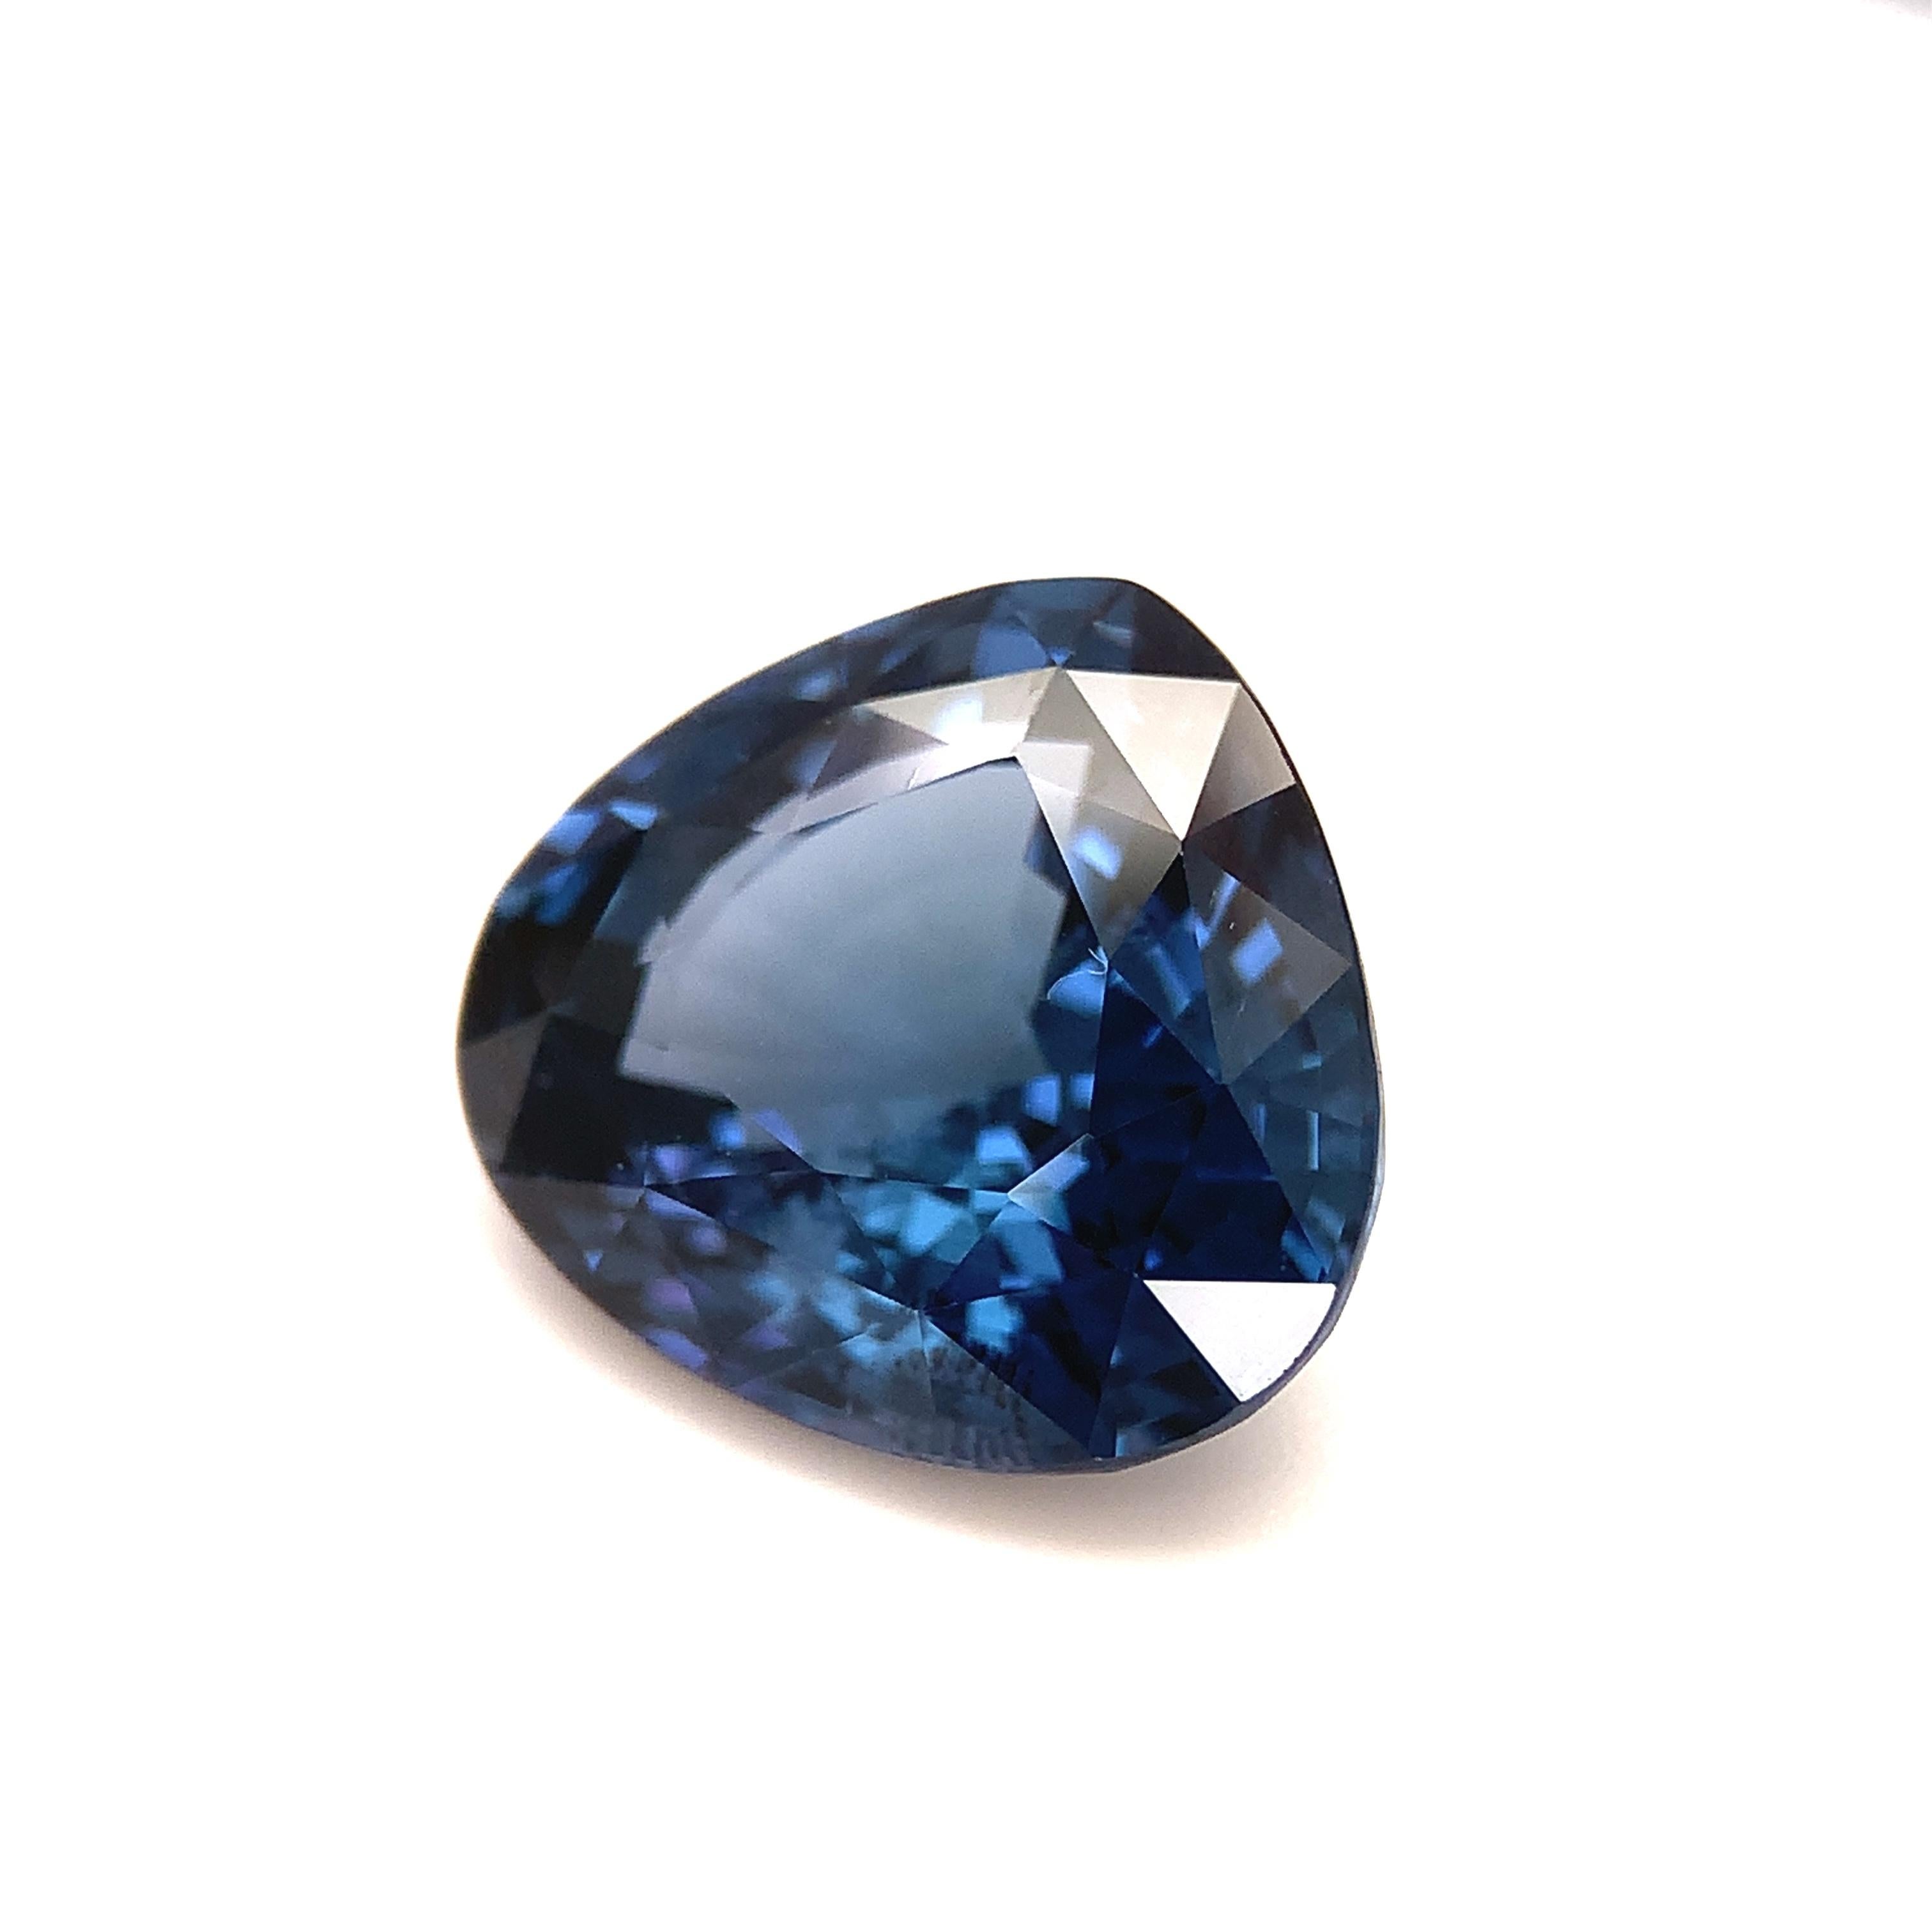 Pear Cut Unheated 5.02 Carat Blue Spinel, Loose Gemstone, GIA Certified ..... A For Sale